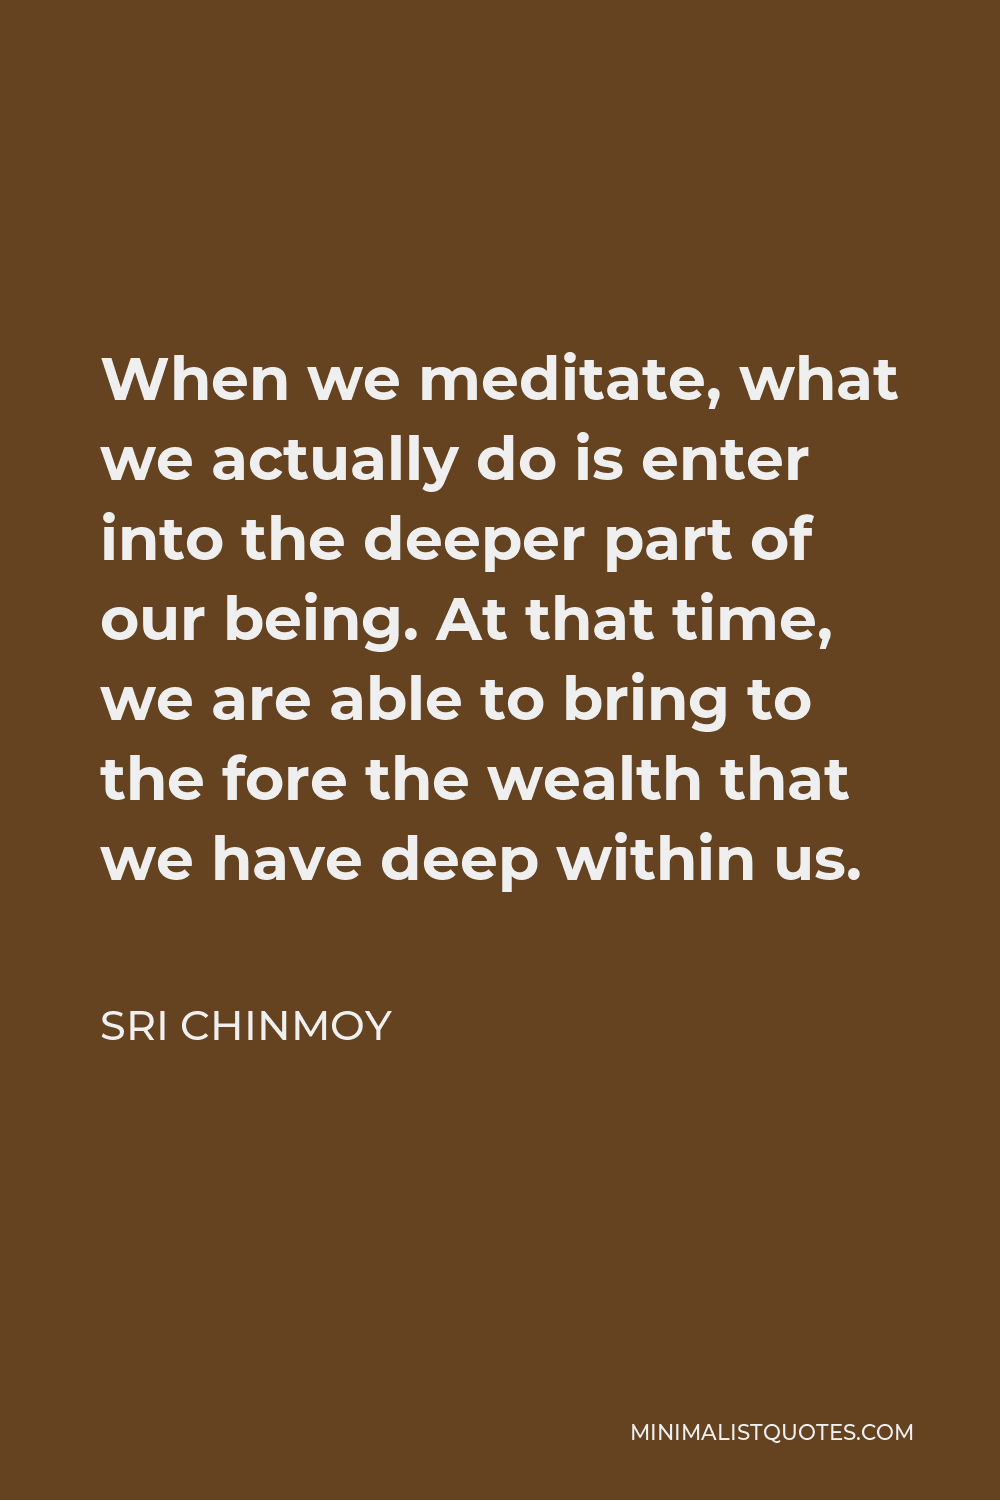 Sri Chinmoy Quote - When we meditate, what we actually do is enter into the deeper part of our being. At that time, we are able to bring to the fore the wealth that we have deep within us.